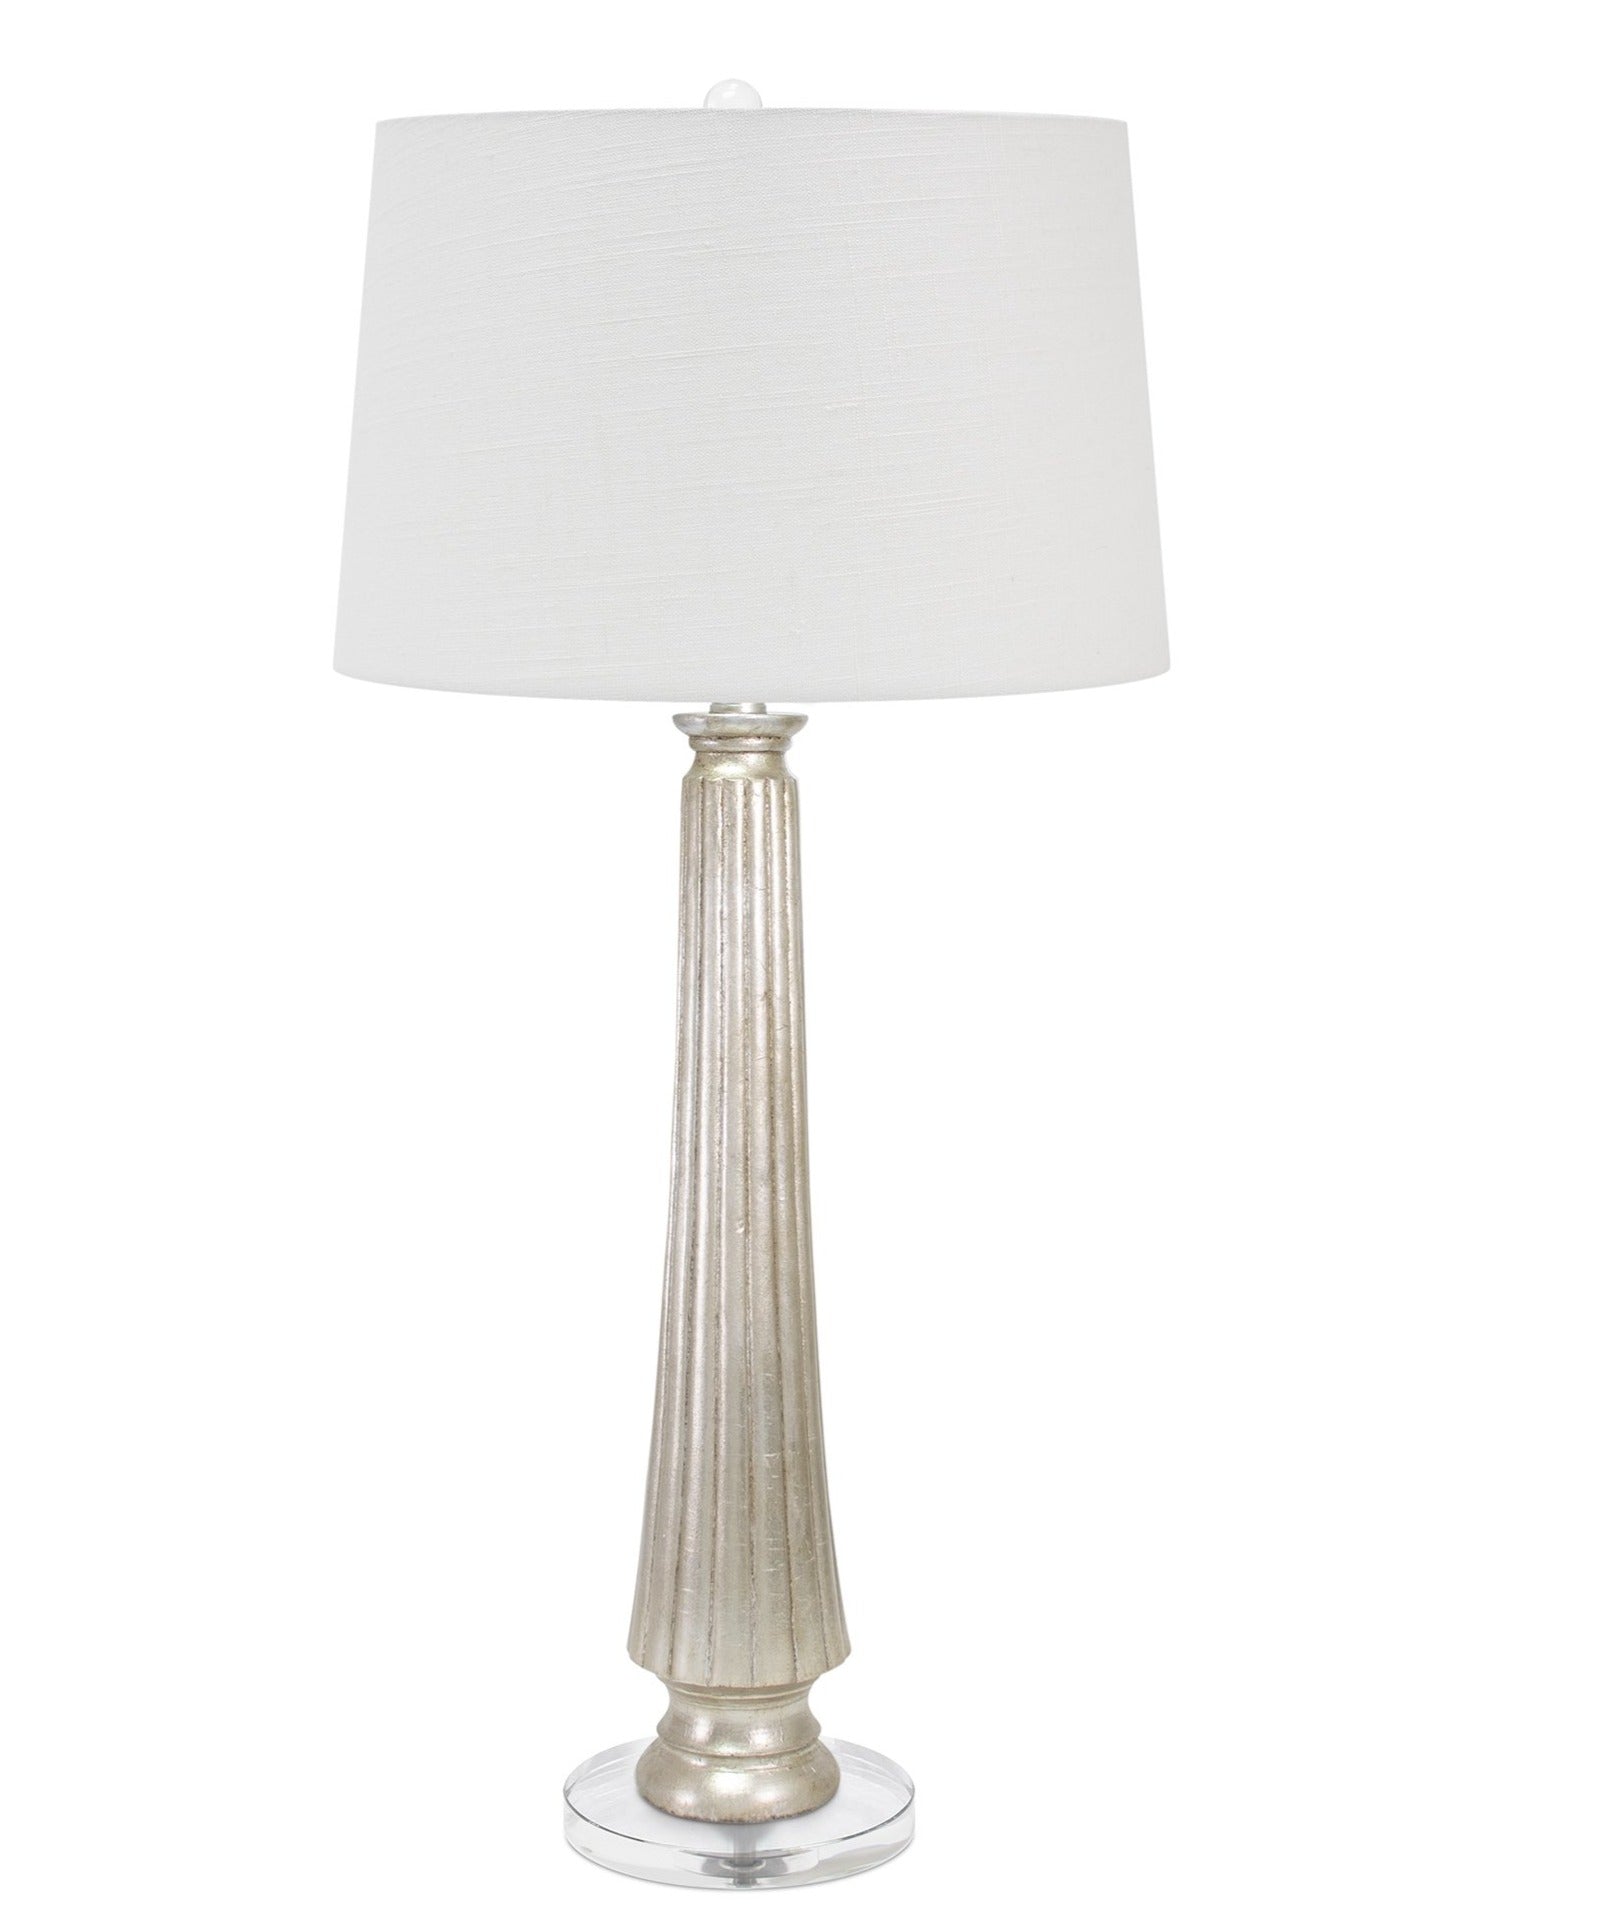 Squire Table Lamp - Silver - Couture Lamps